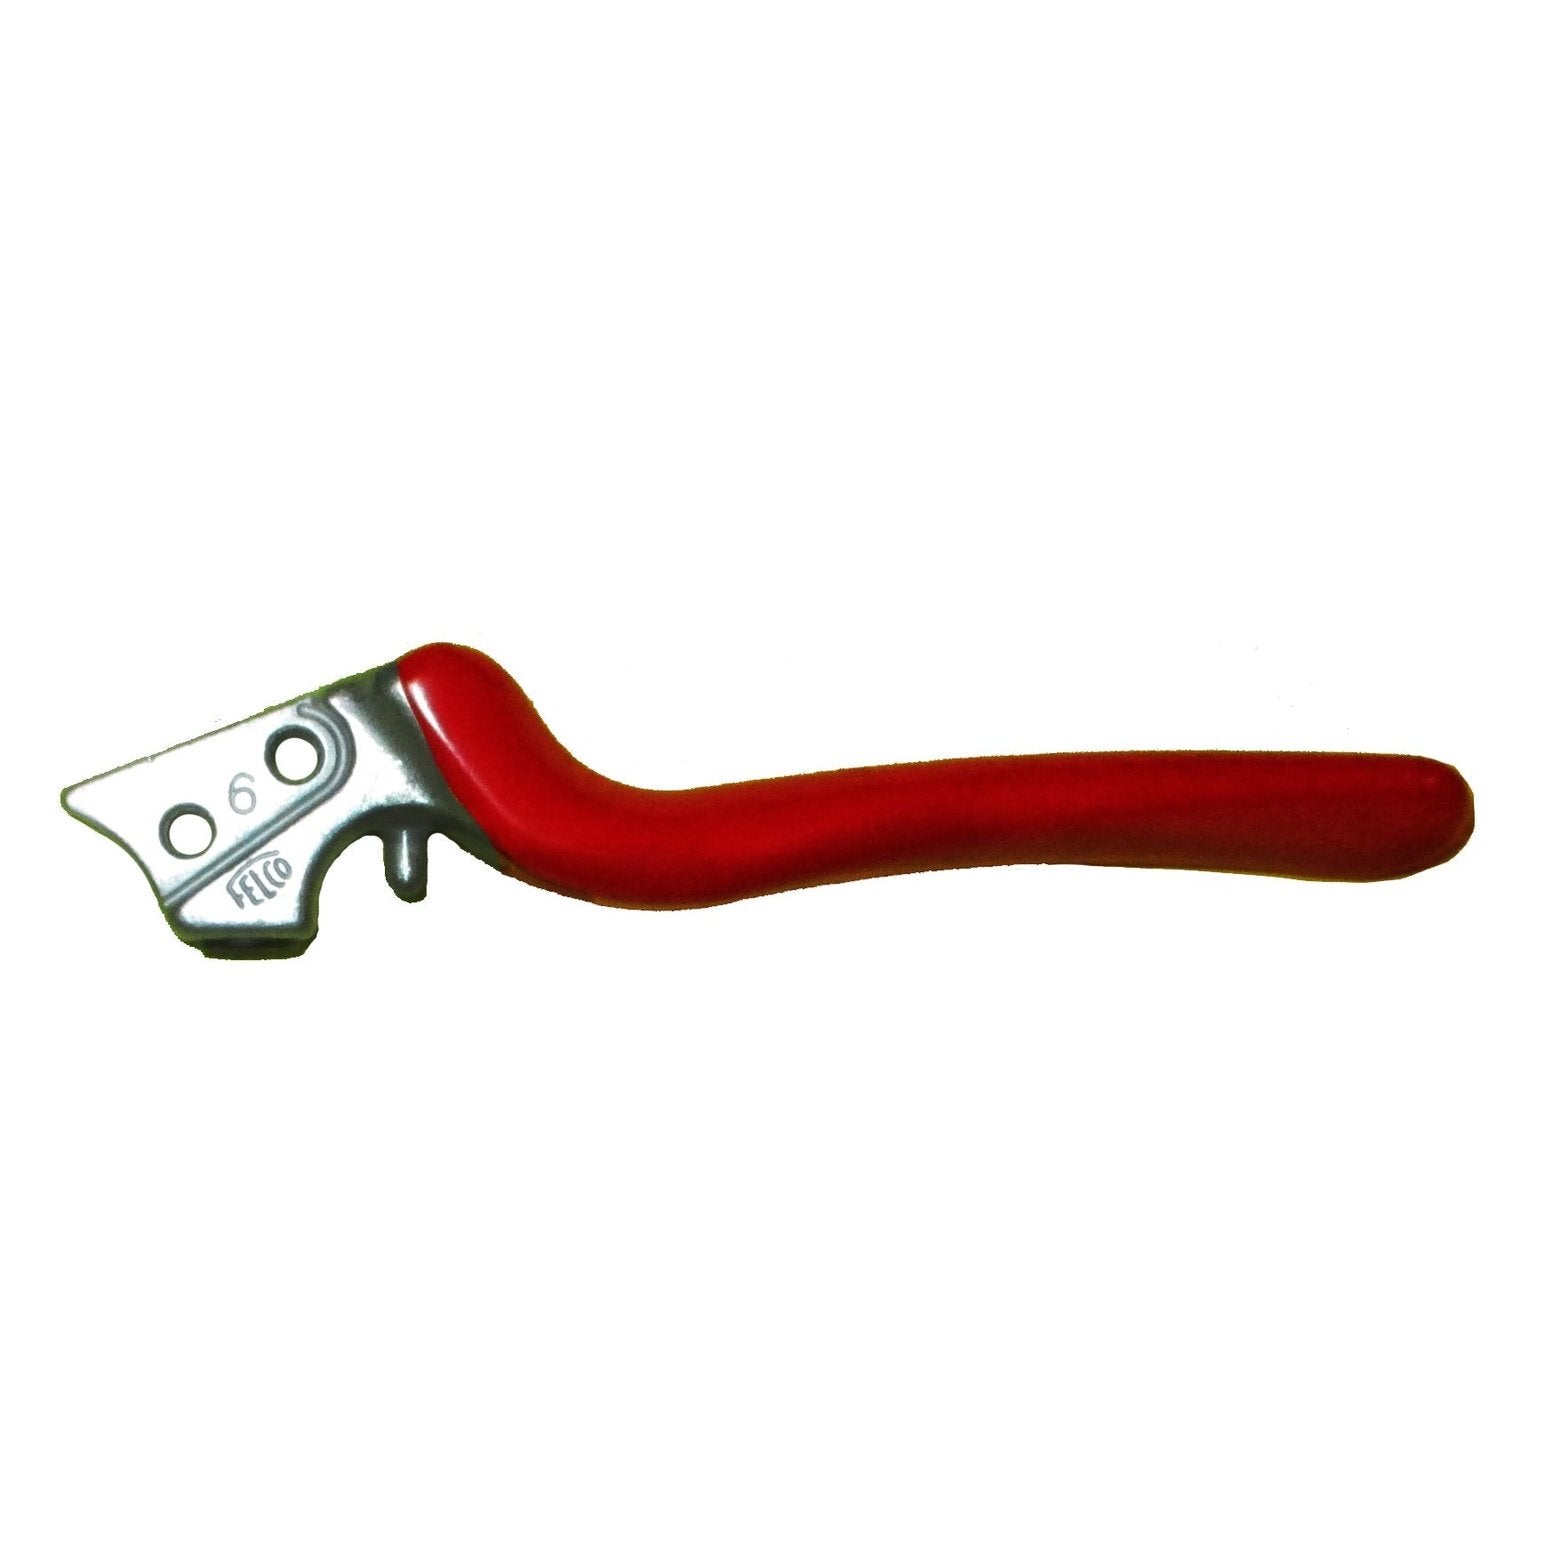 Felco 6/2 Replacement Handle Without Anvil Blade